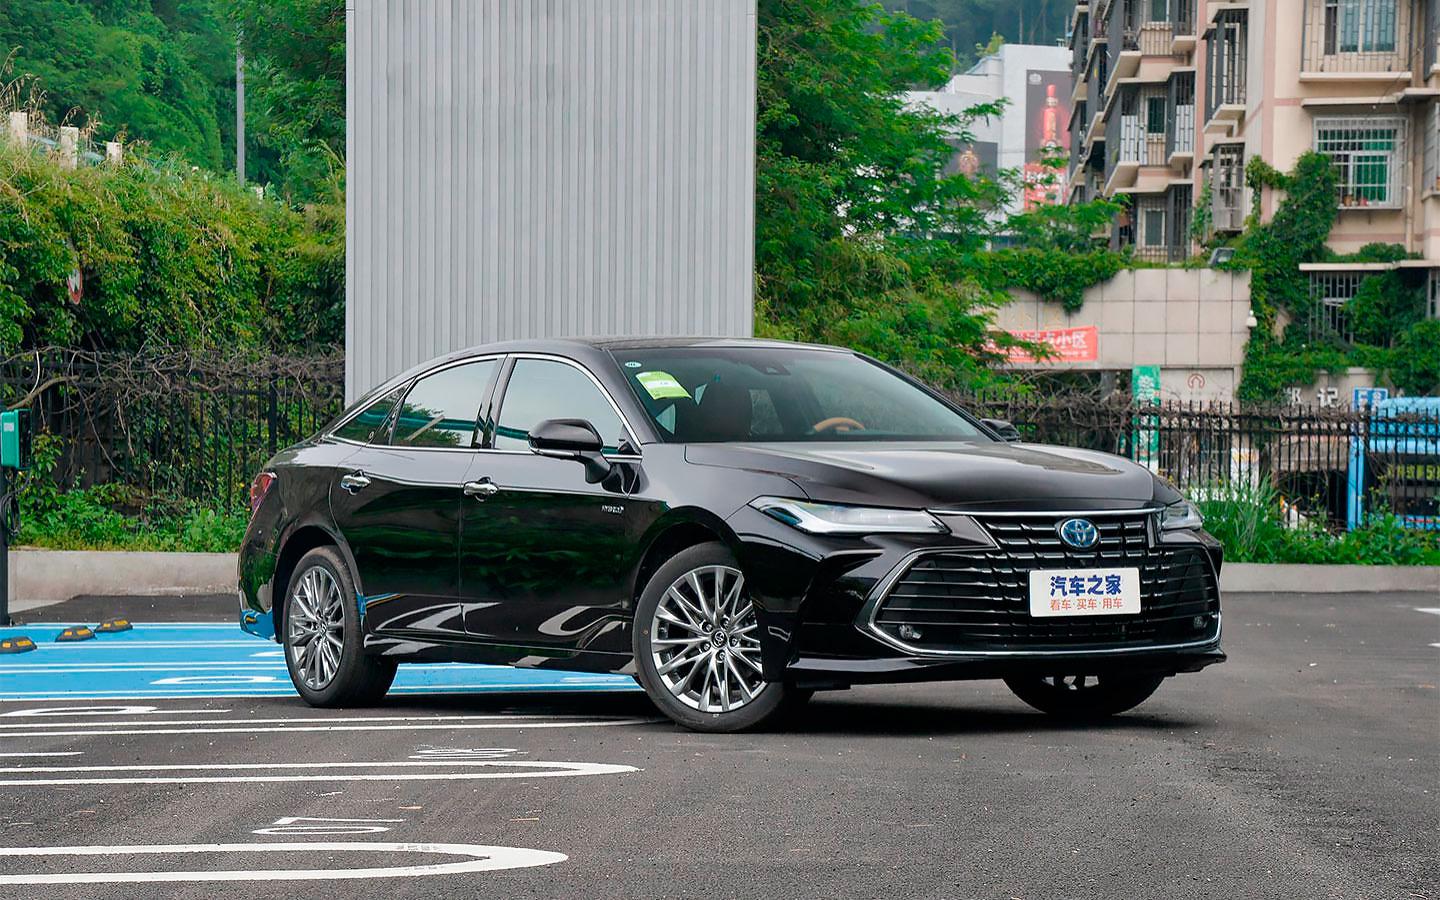 Toyota Camry has noticeably fallen in price in Russia, and Toyota Avalon has risen in price